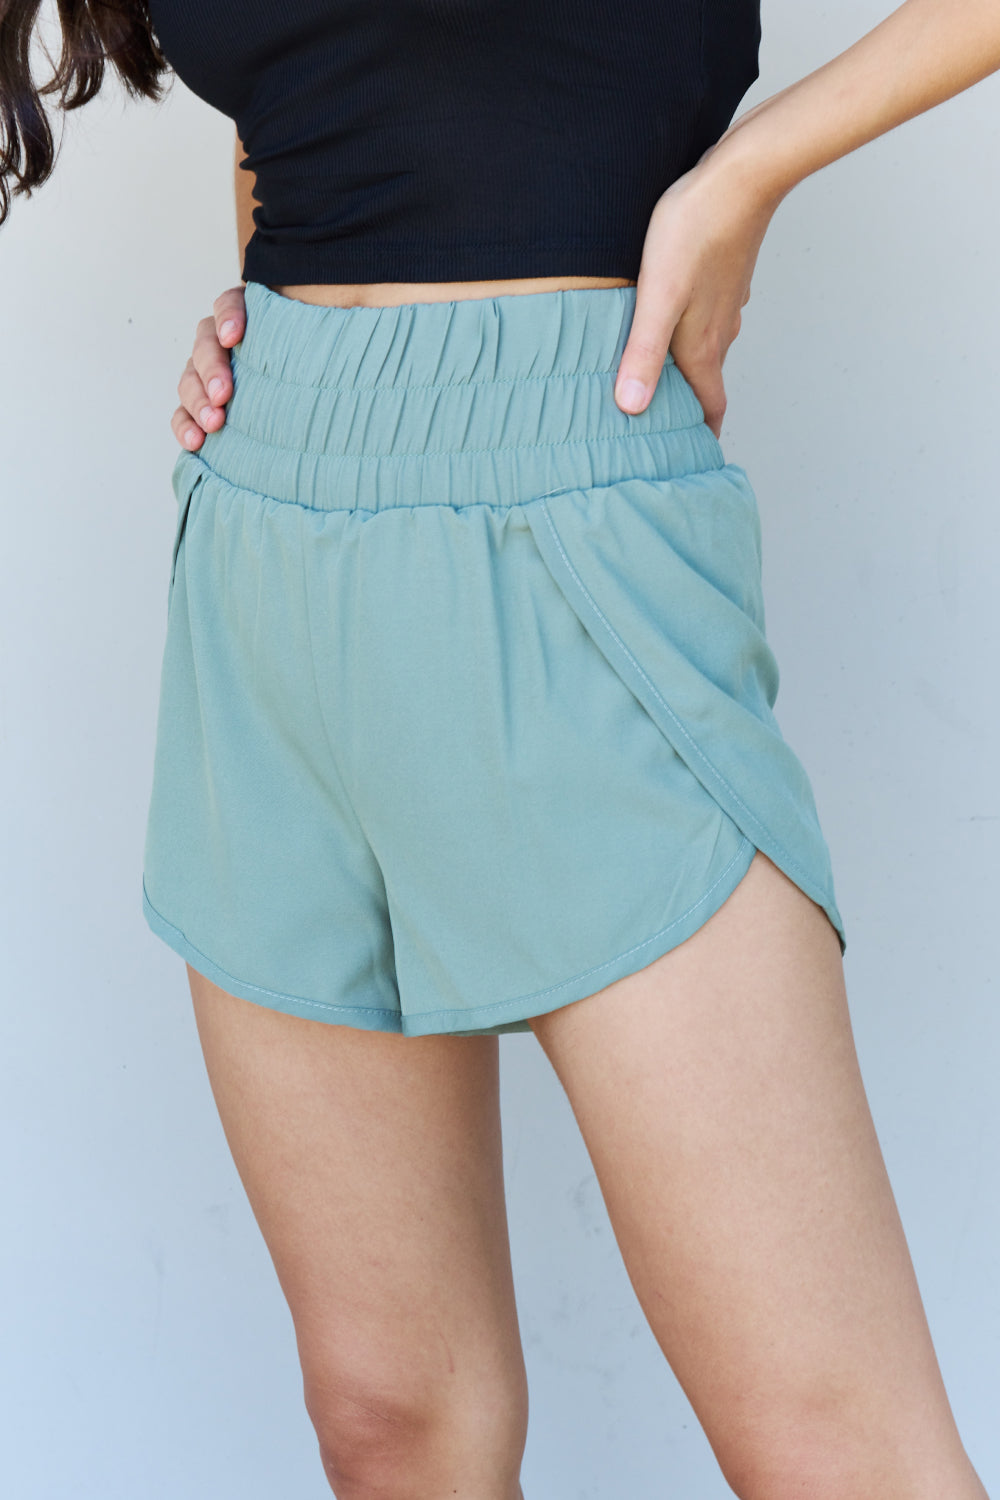 Ninexis Stay Active High Waistband Active Shorts in Pastel Blue Print on any thing USA/STOD clothes